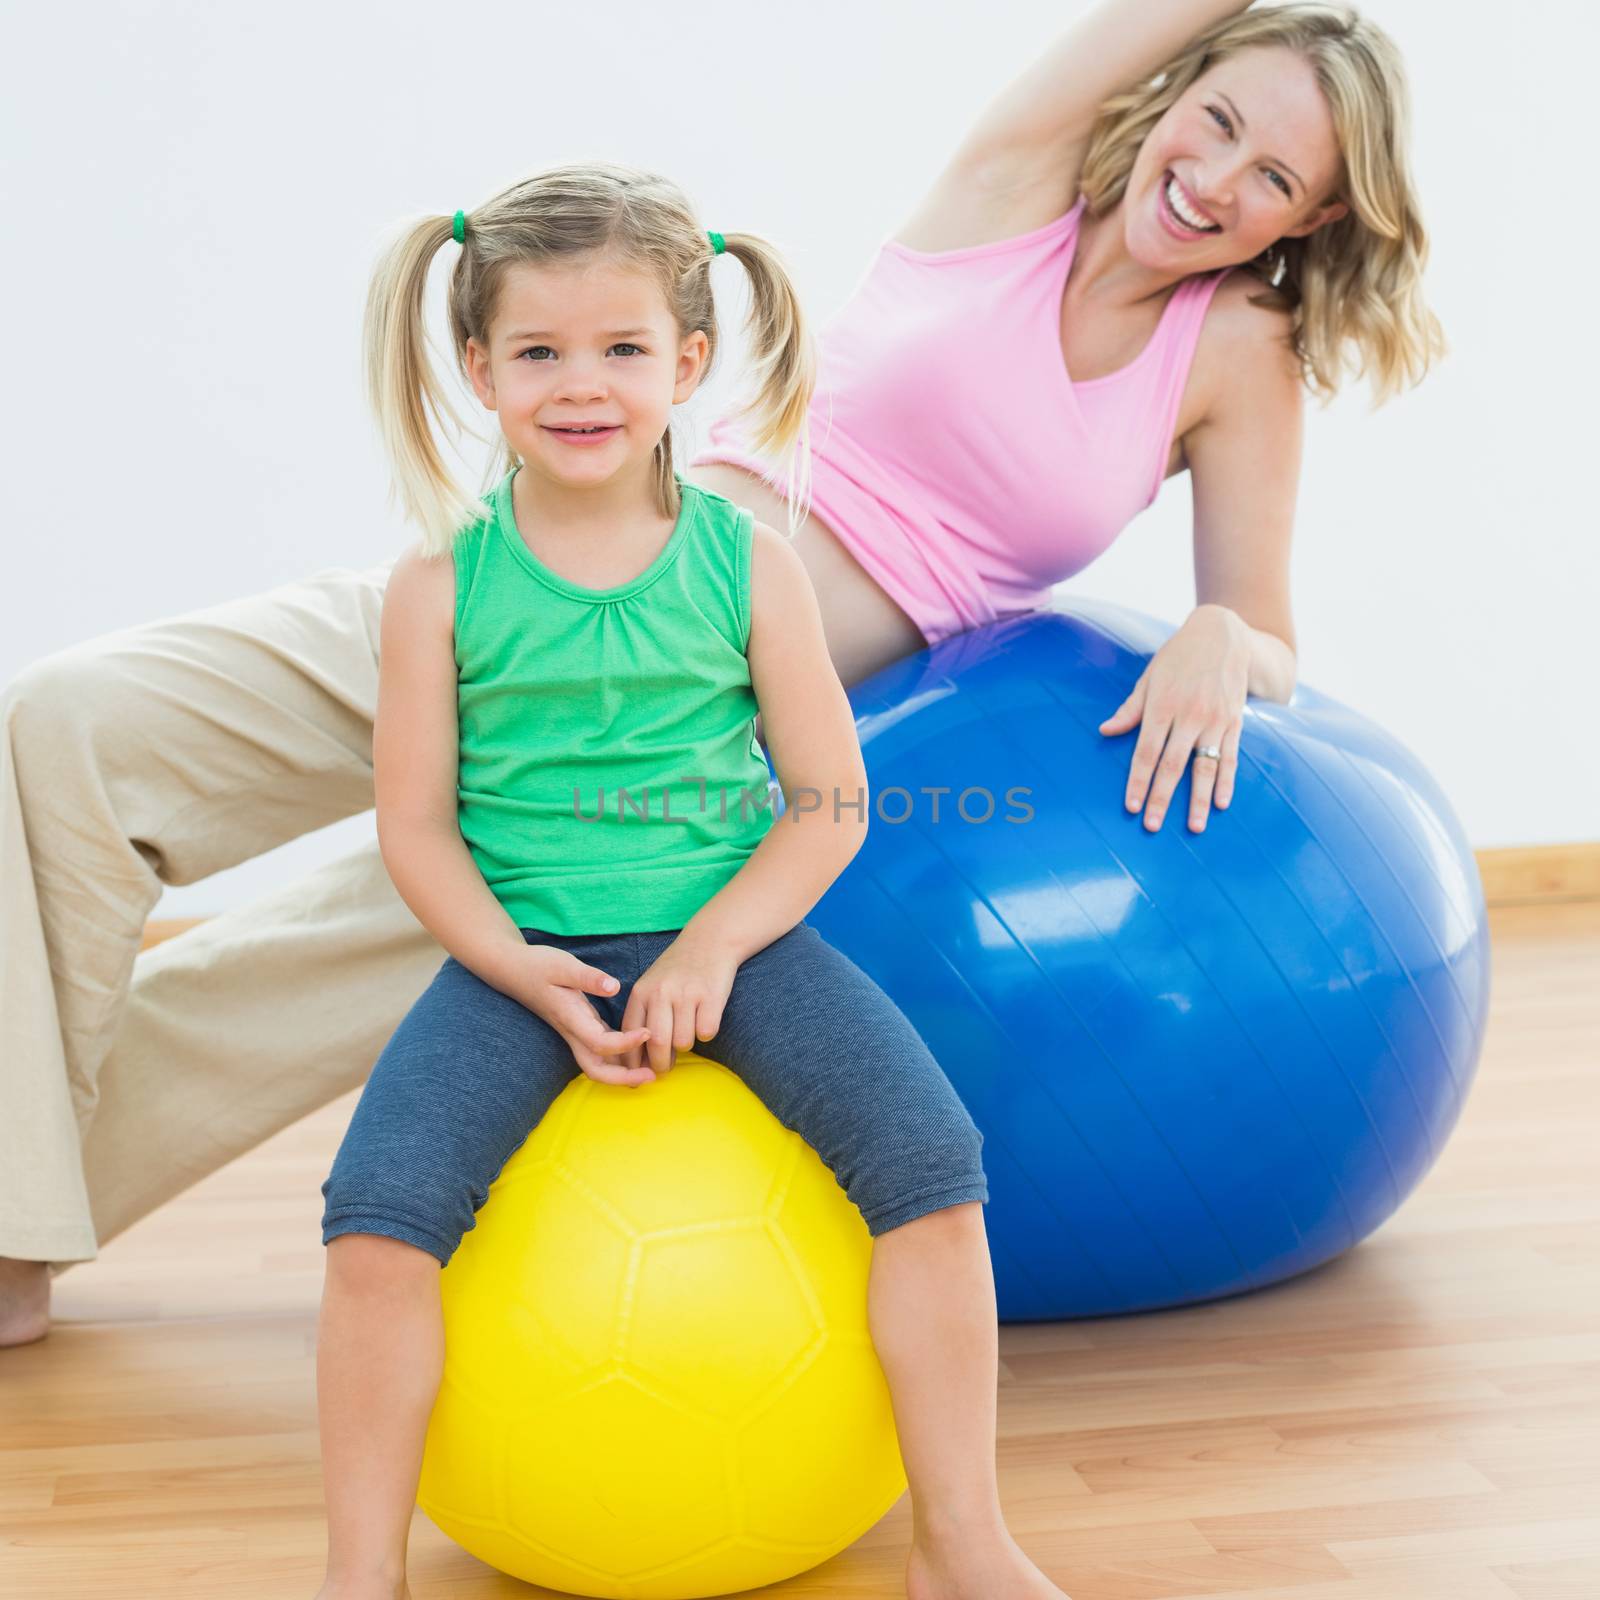 Smiling pregnant woman exercising on exercise ball with young daughter by Wavebreakmedia